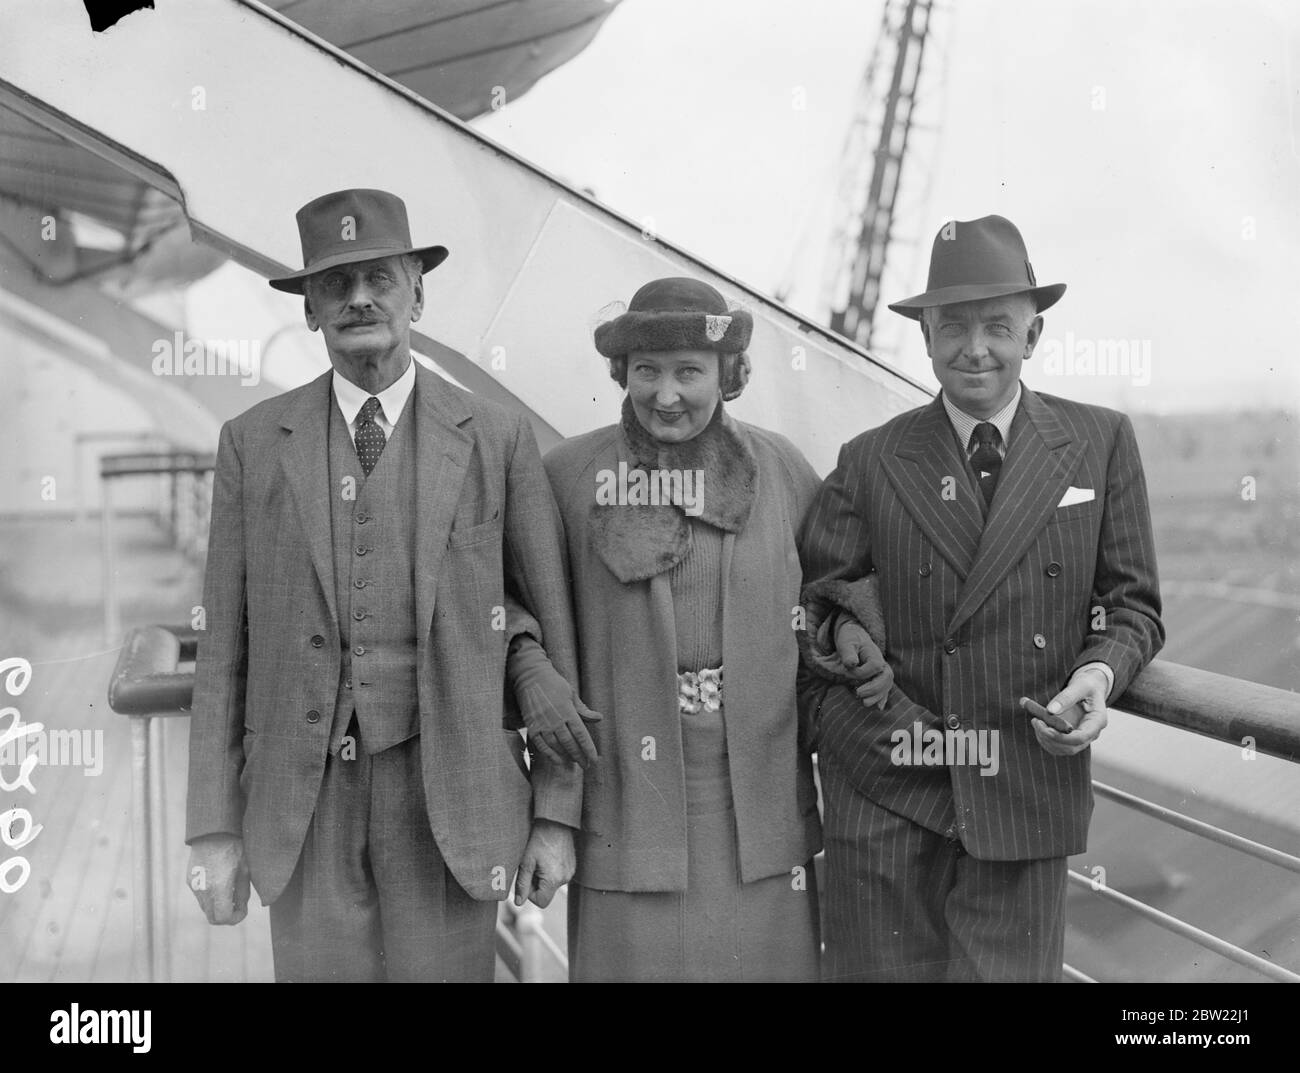 Mr, T.O.M Sopwith arrived at Southampton with his wife on the Queen Mary from America, where he challenged unsuccessfully with endeavour II for the America's Cup. 13 September 1937. Stock Photo